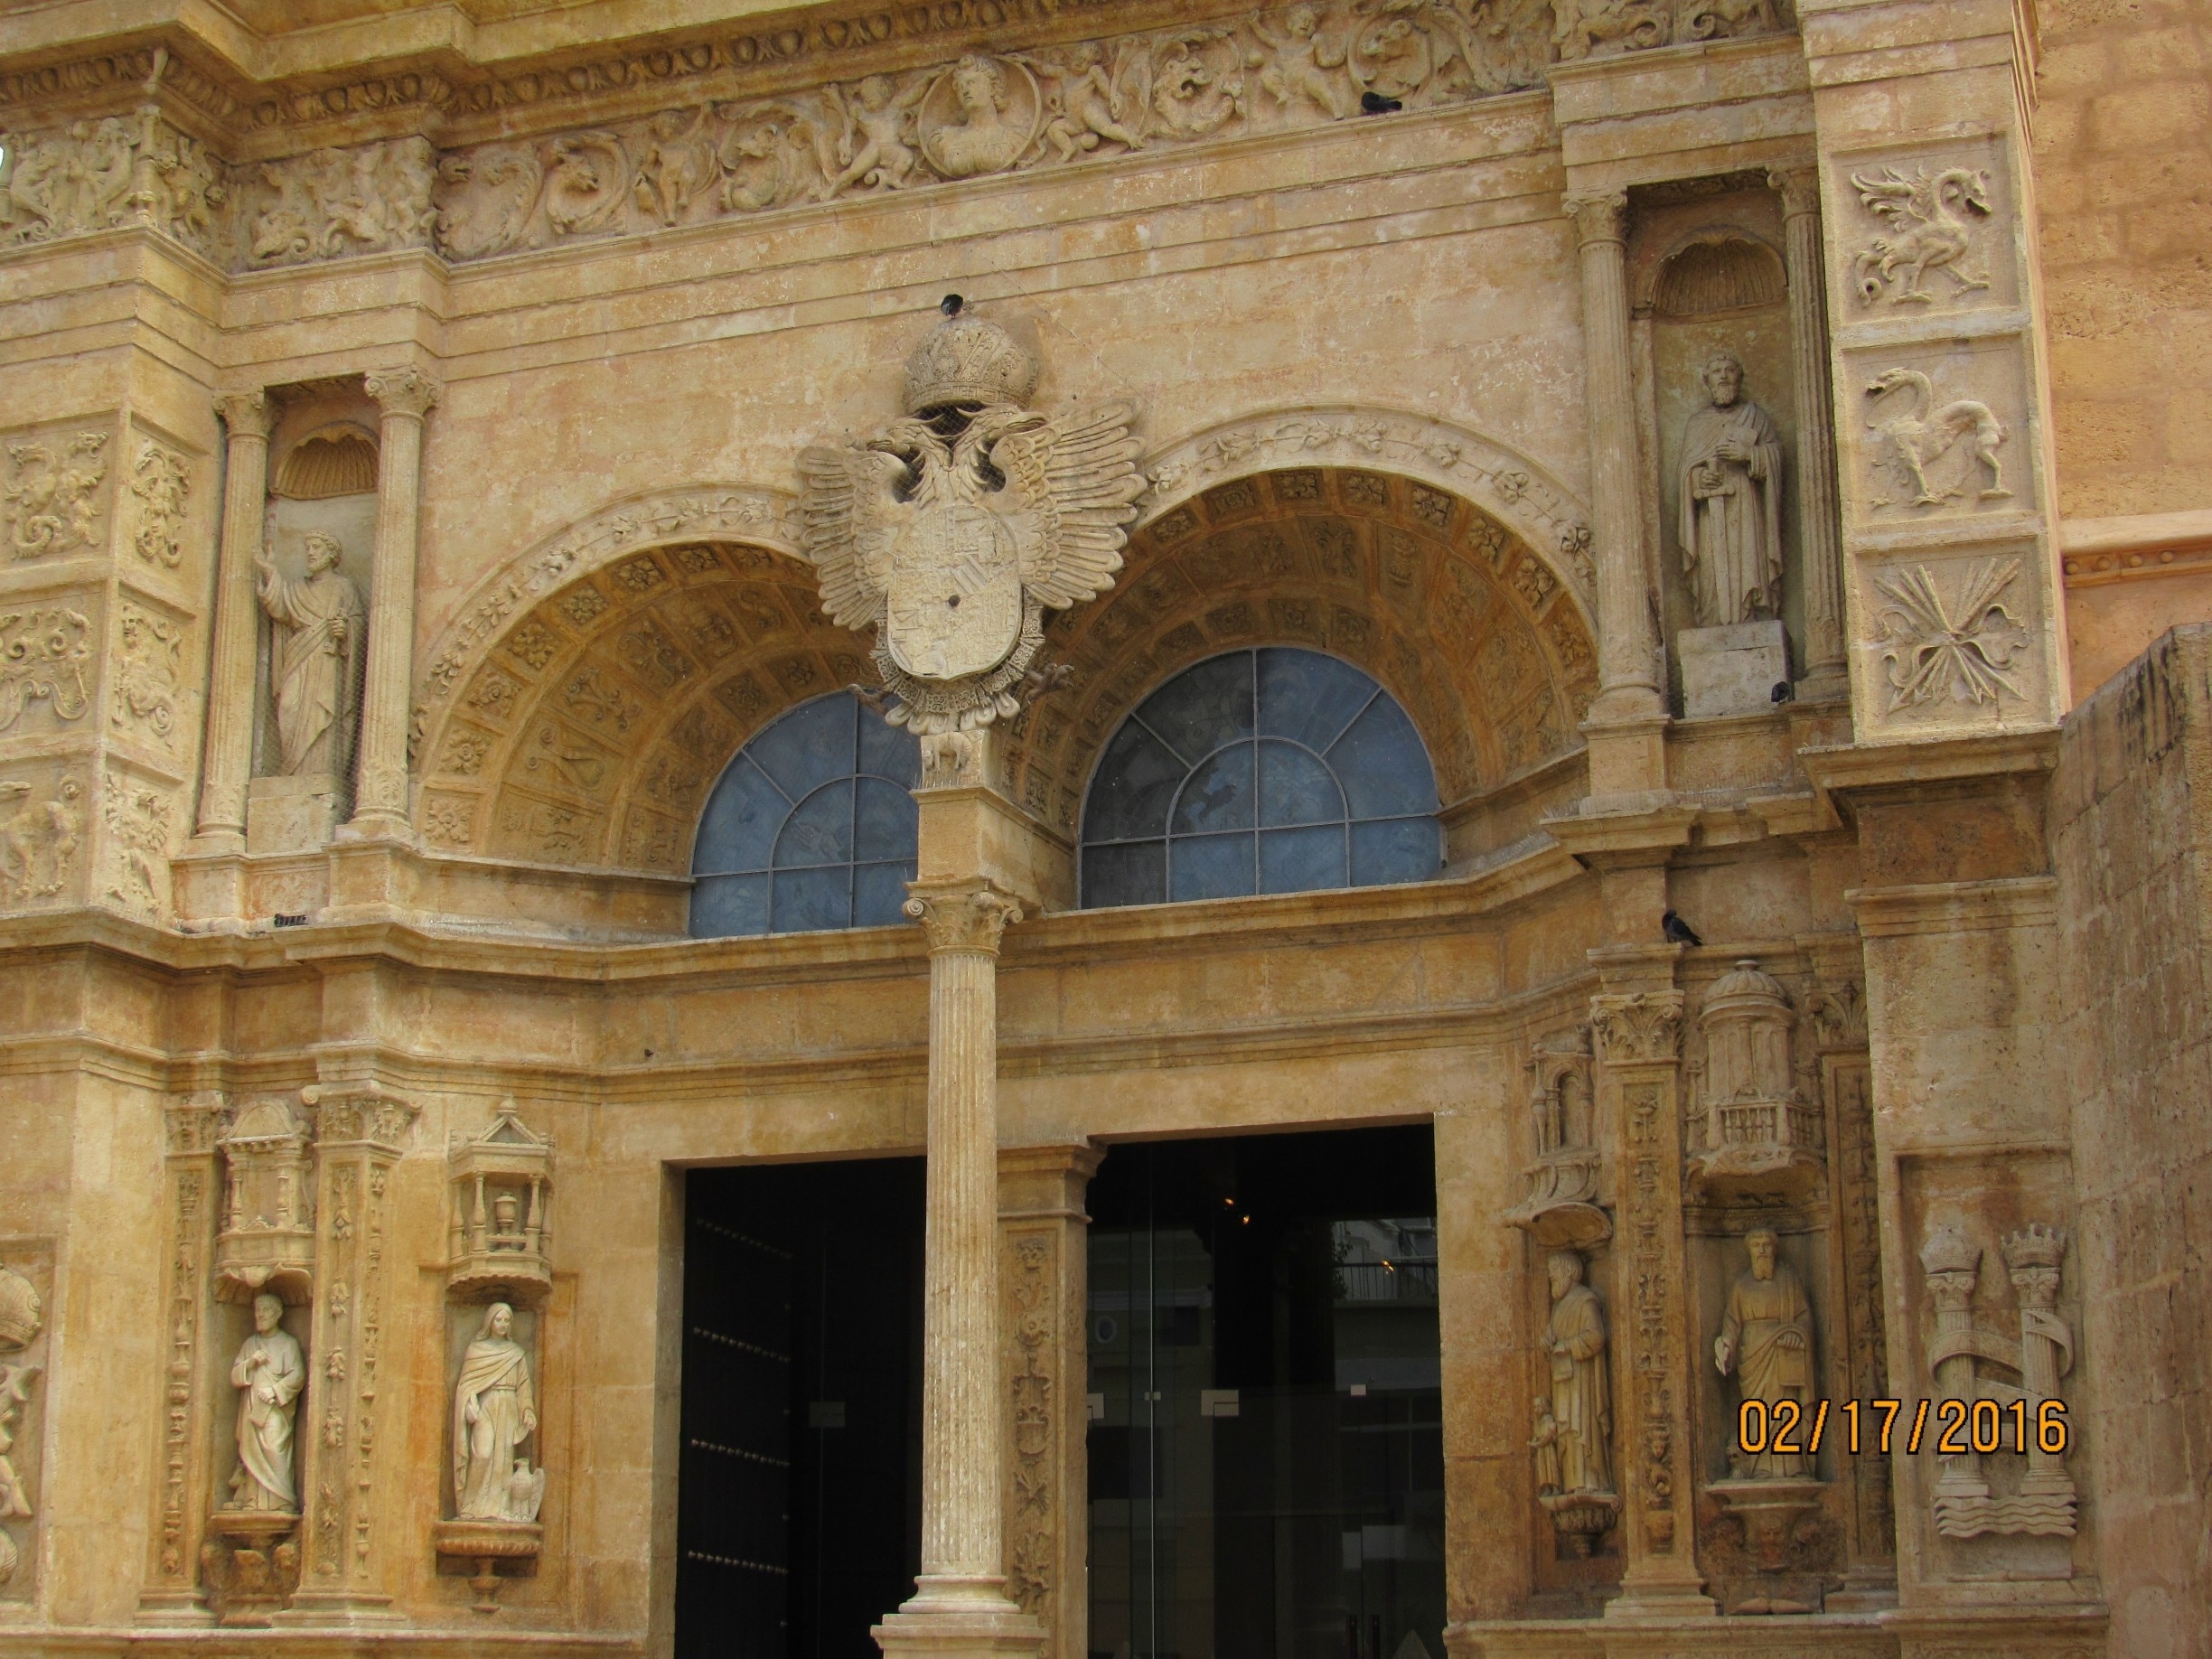 Details of the exterior of the Cathedral 